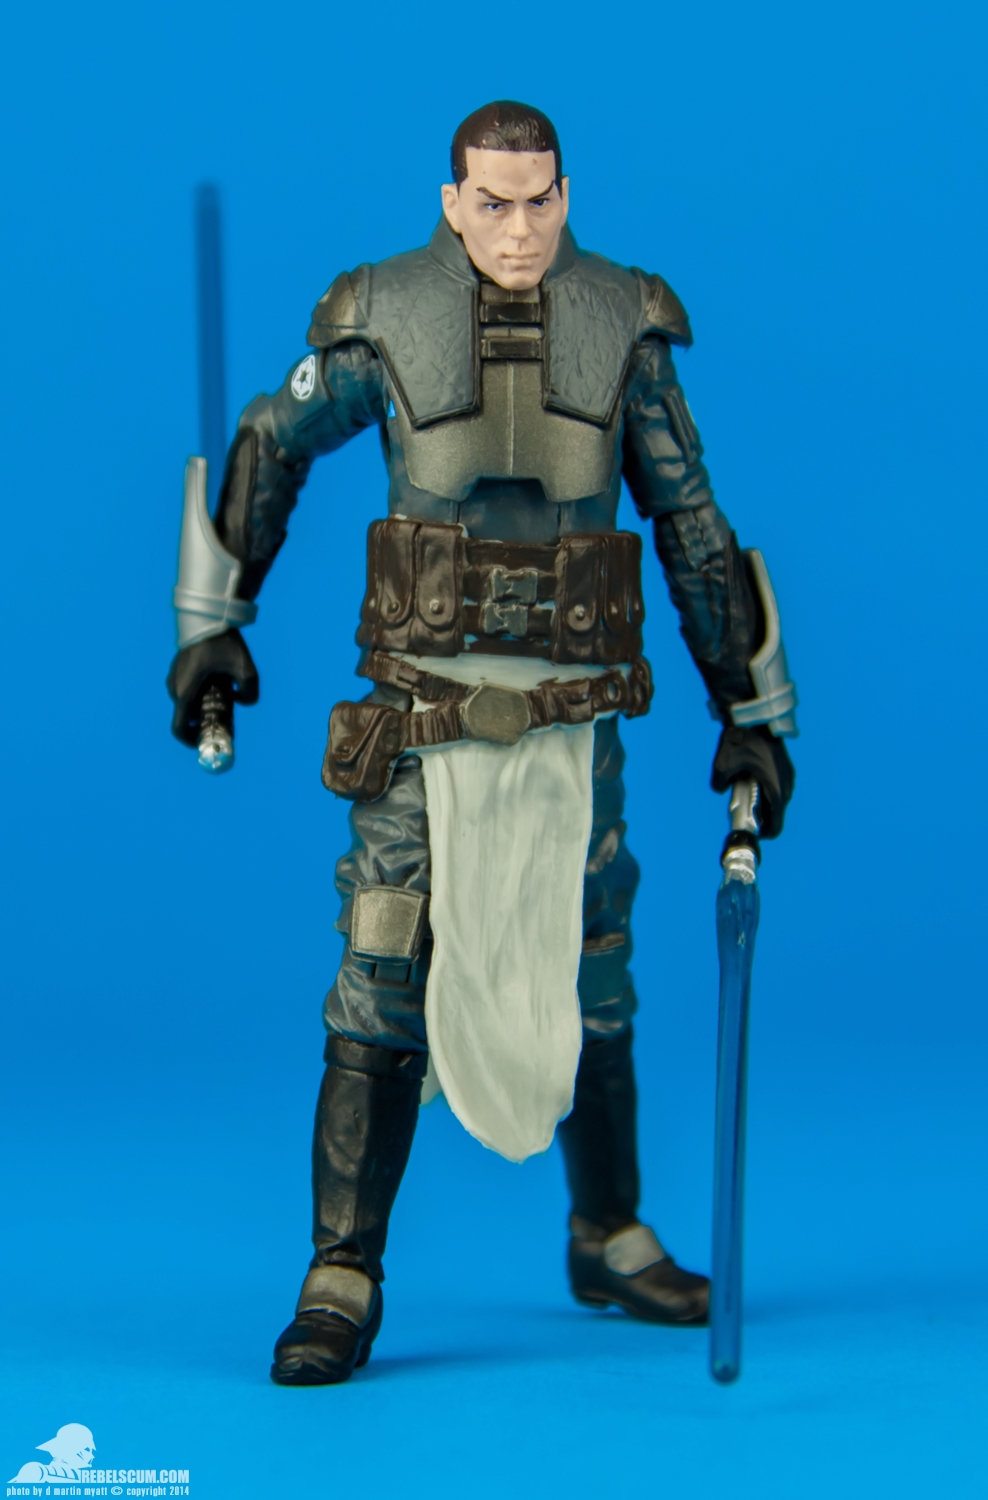 REVIEW AND PHOTO GALLERY: Star Wars The Black Series TBS2 #05 - Starkiller  (Galen Marek) - #05 2014